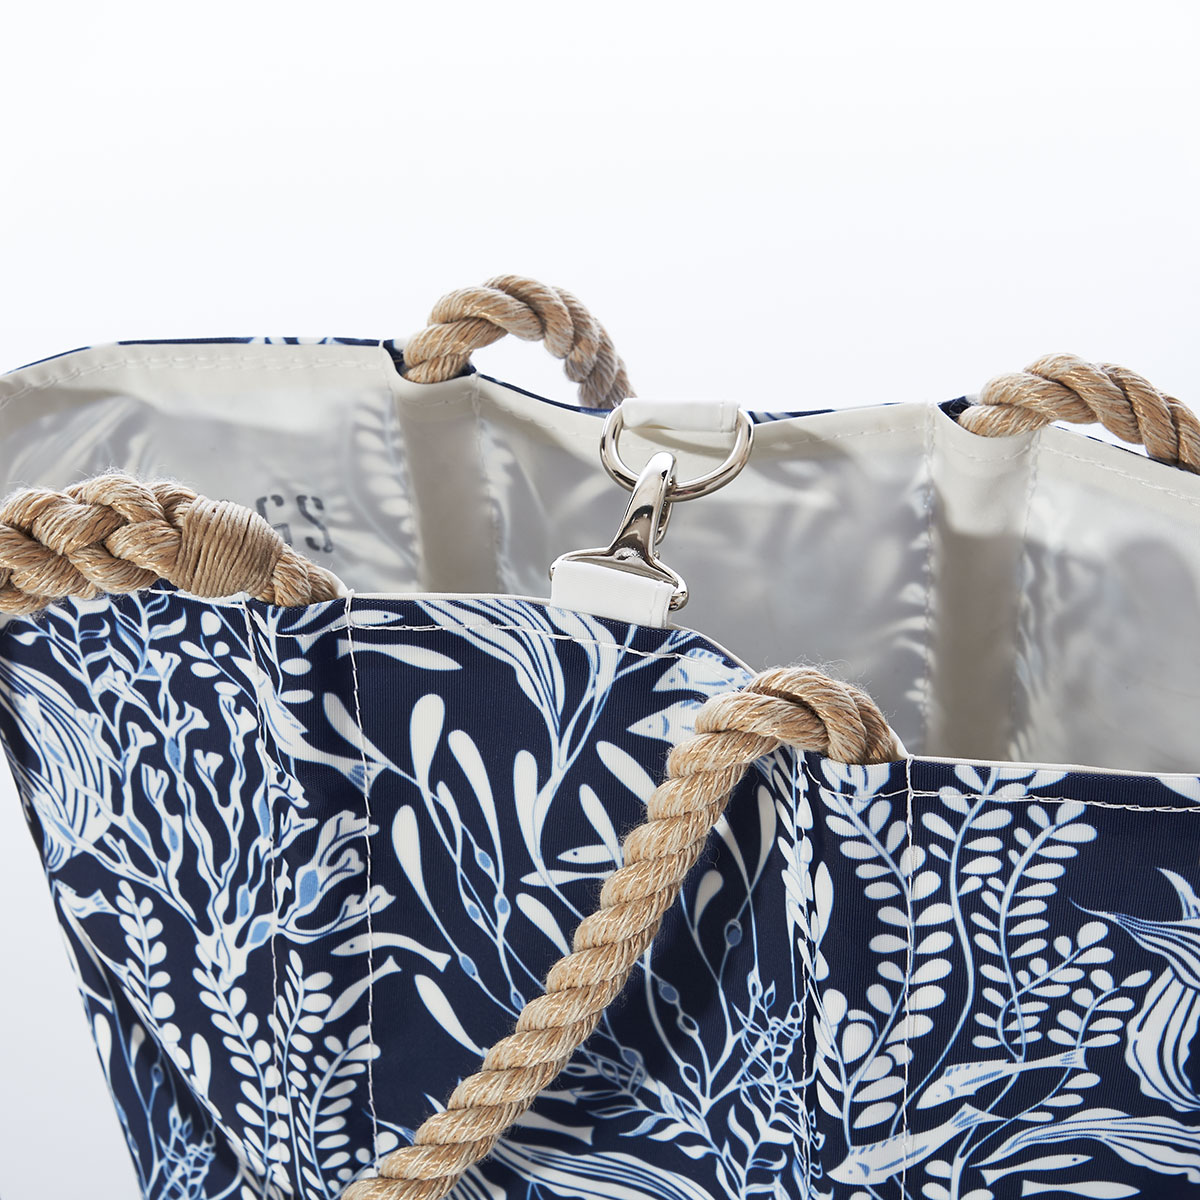 clasp closure on handbag with little fish swim among various types of seaweed in shades of navy and white on a recycled sail cloth handbag with hemp rope handles